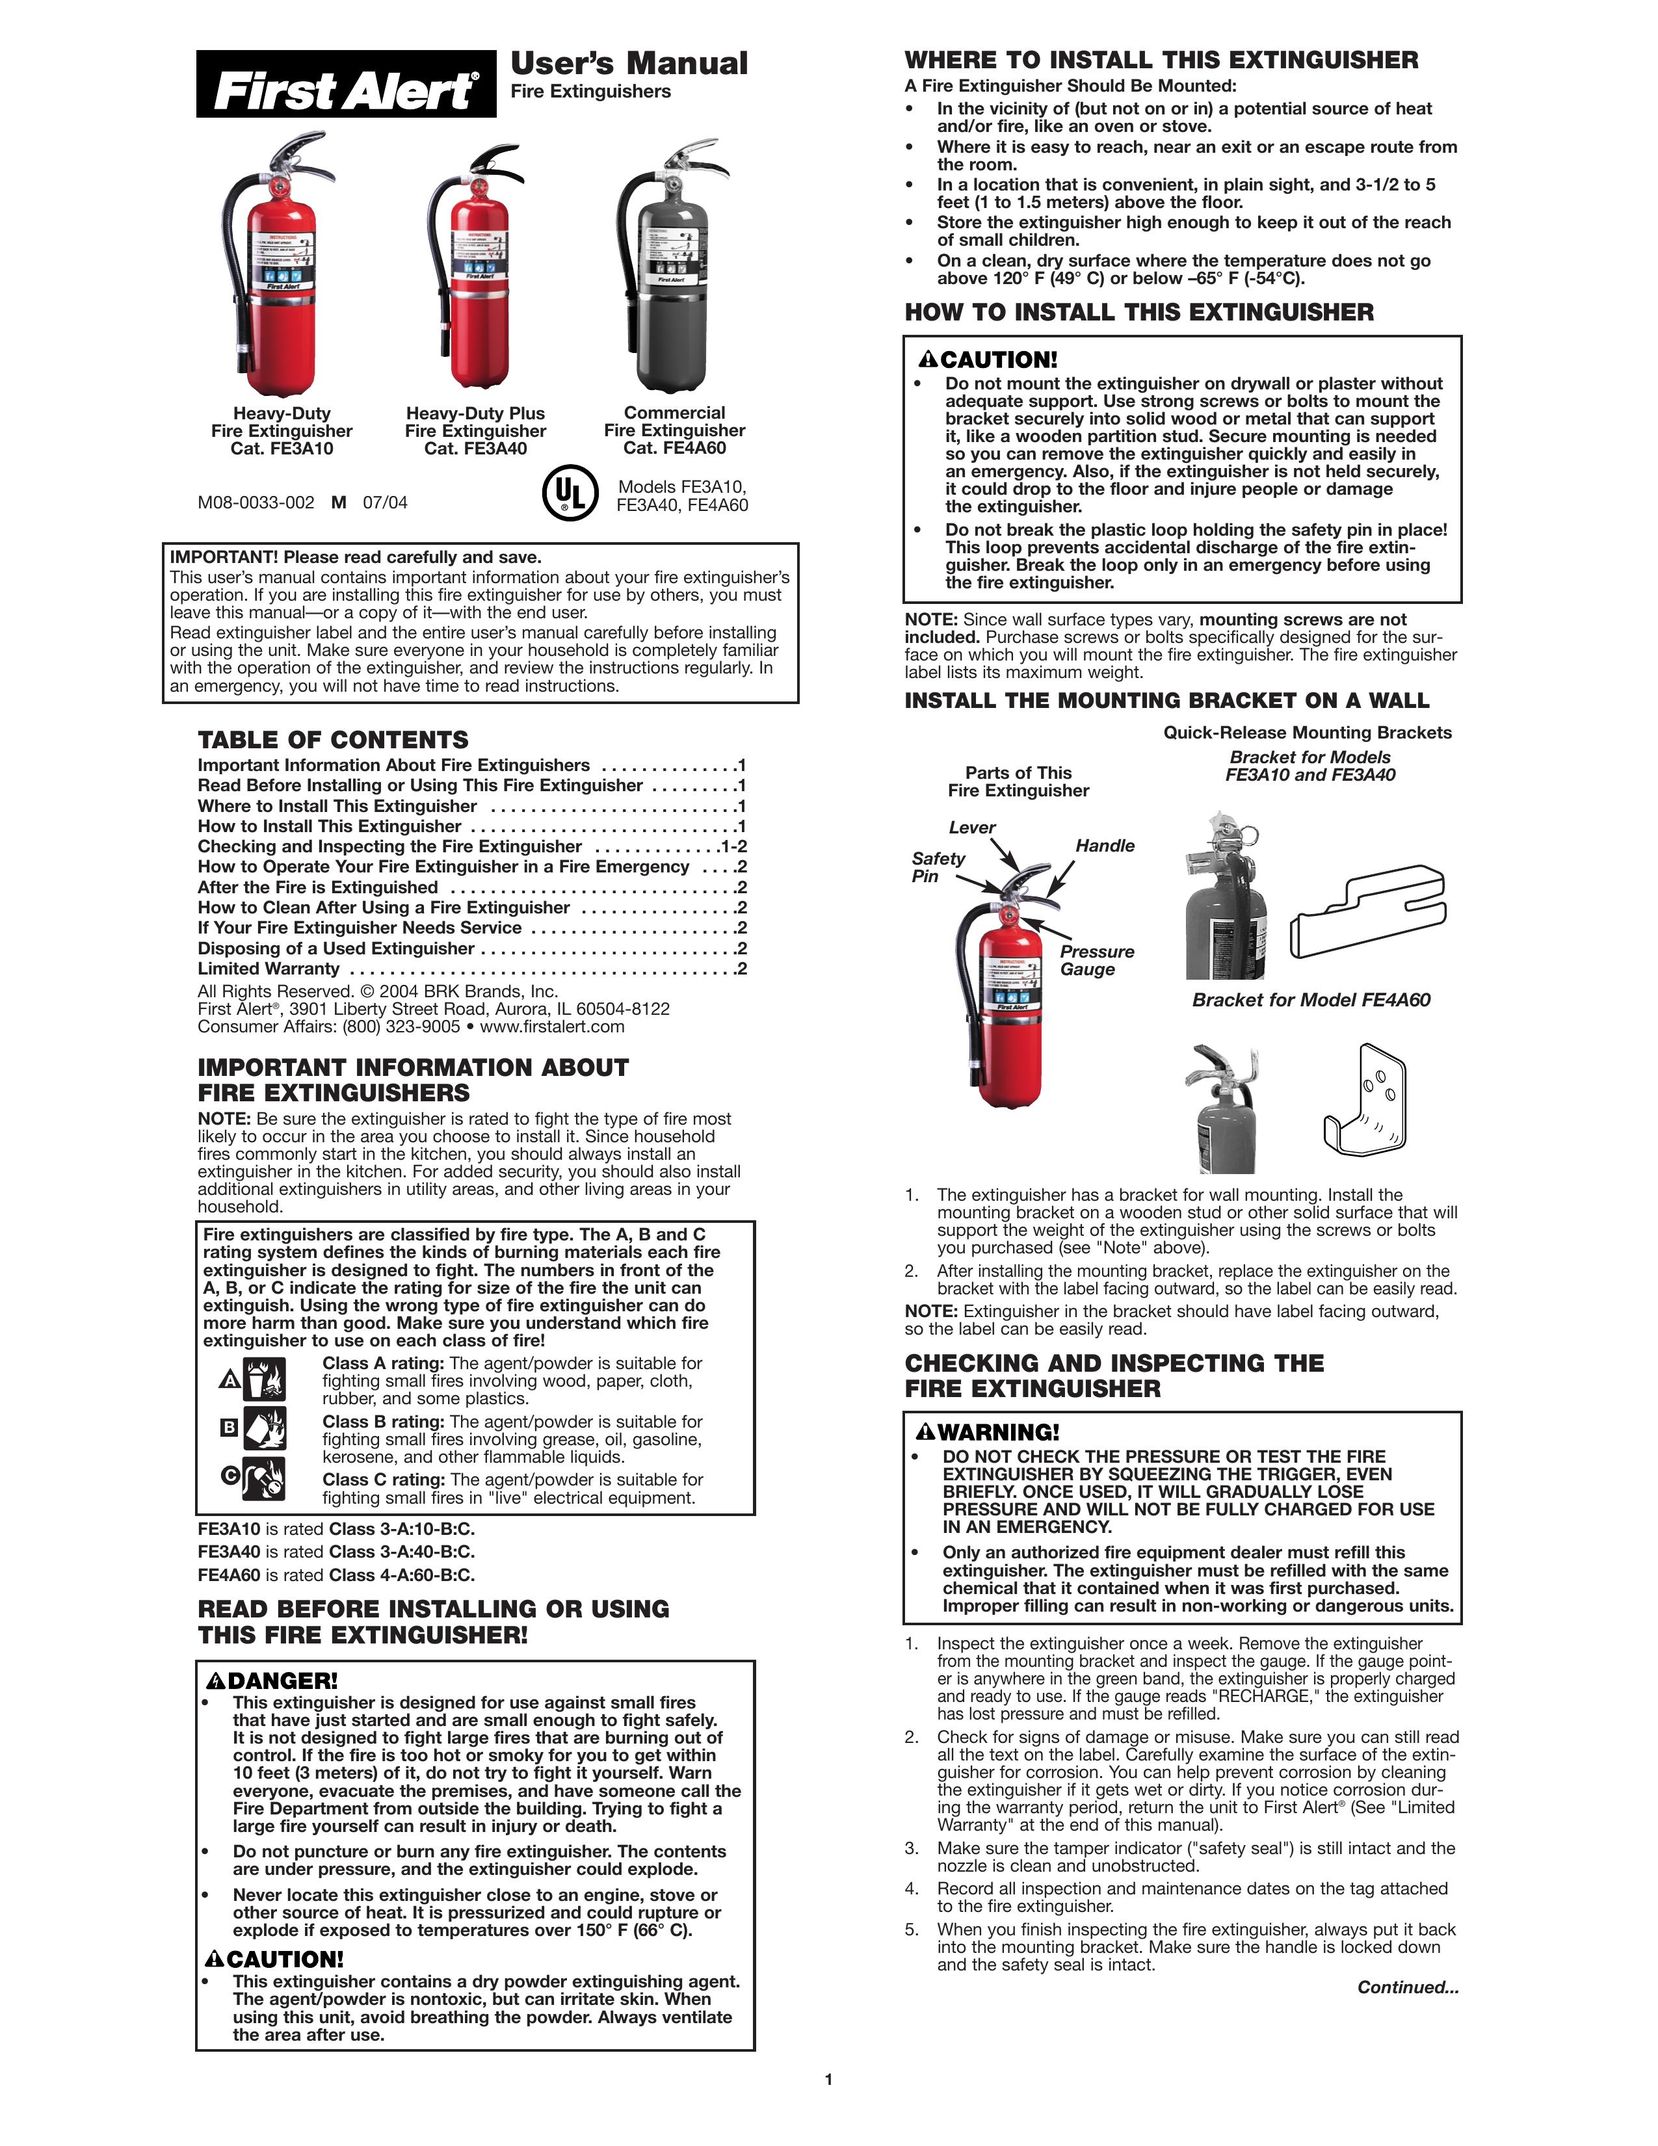 First Alert FE4A60 Fire Extinguisher User Manual